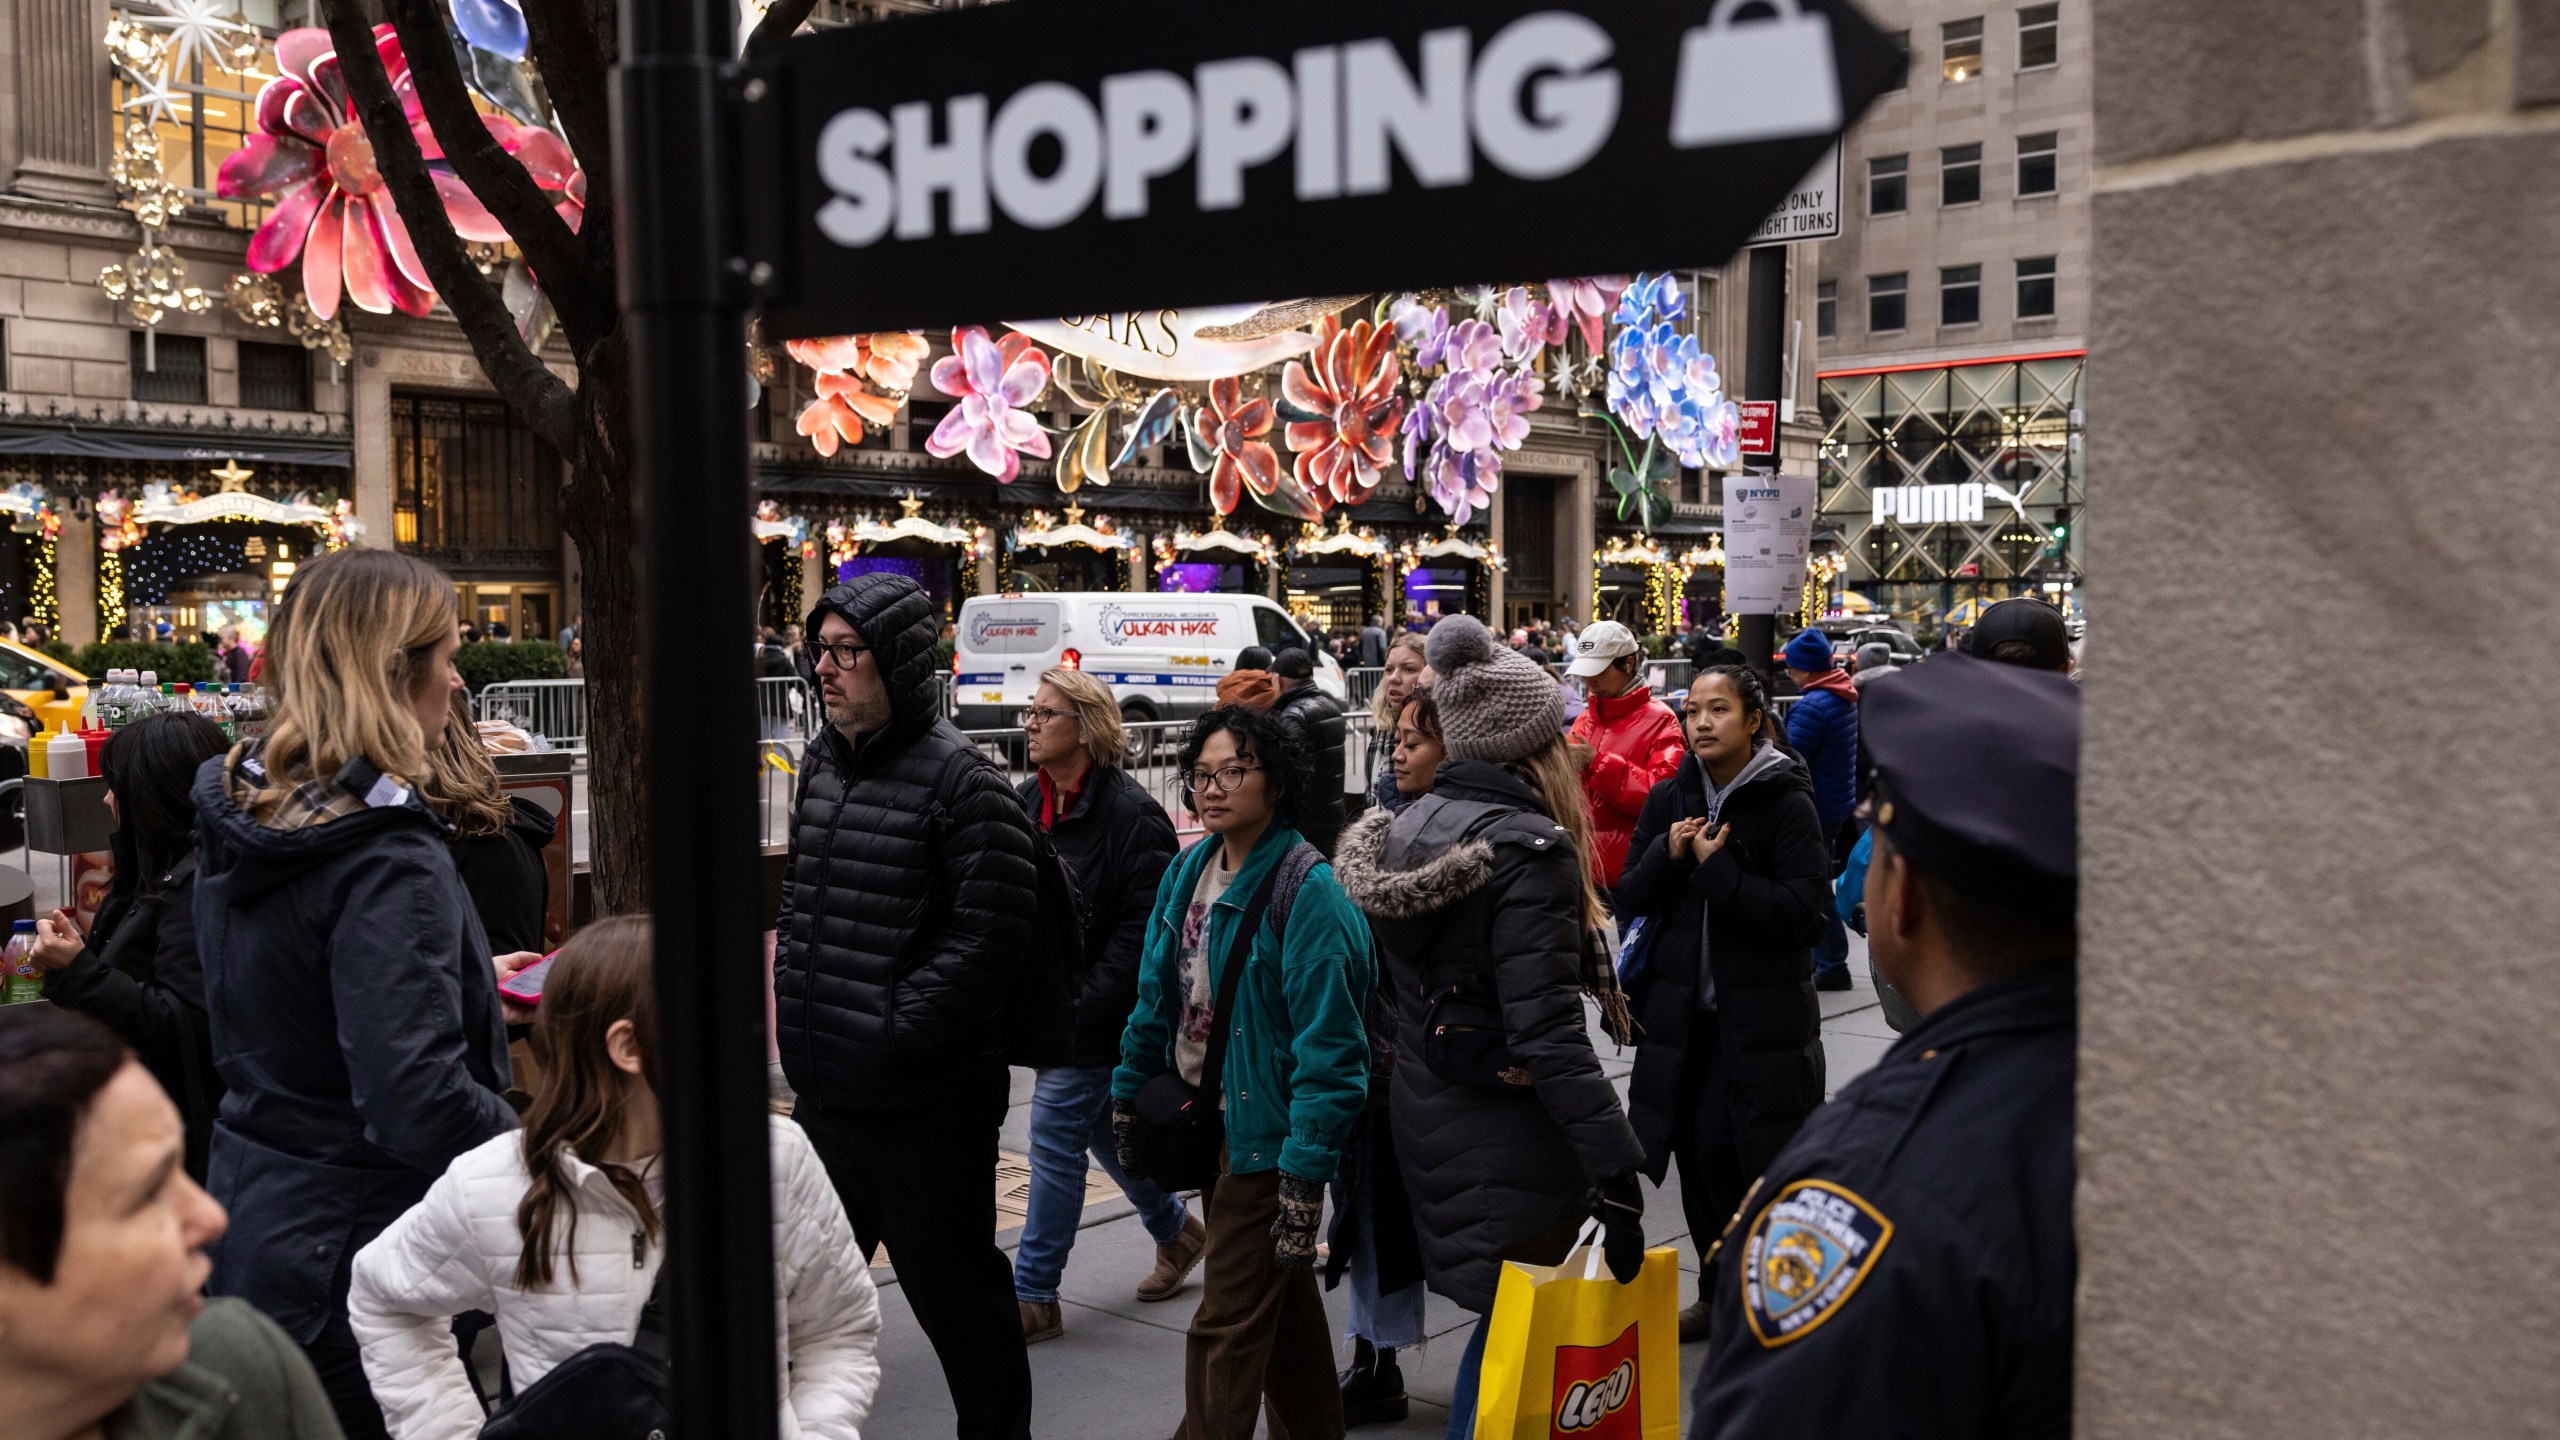 FILE - Shoppers and sightseers walk along 5th Avenue, Dec. 11, 2023, in New York. The National Retail Federation said Wednesday, March 20, 2024, that retail sales will increase anywhere between 2.5% and 3.5% this year, a solid but still slower pace than the 3.6% seen last year. (AP Photo/Yuki Iwamura, File)